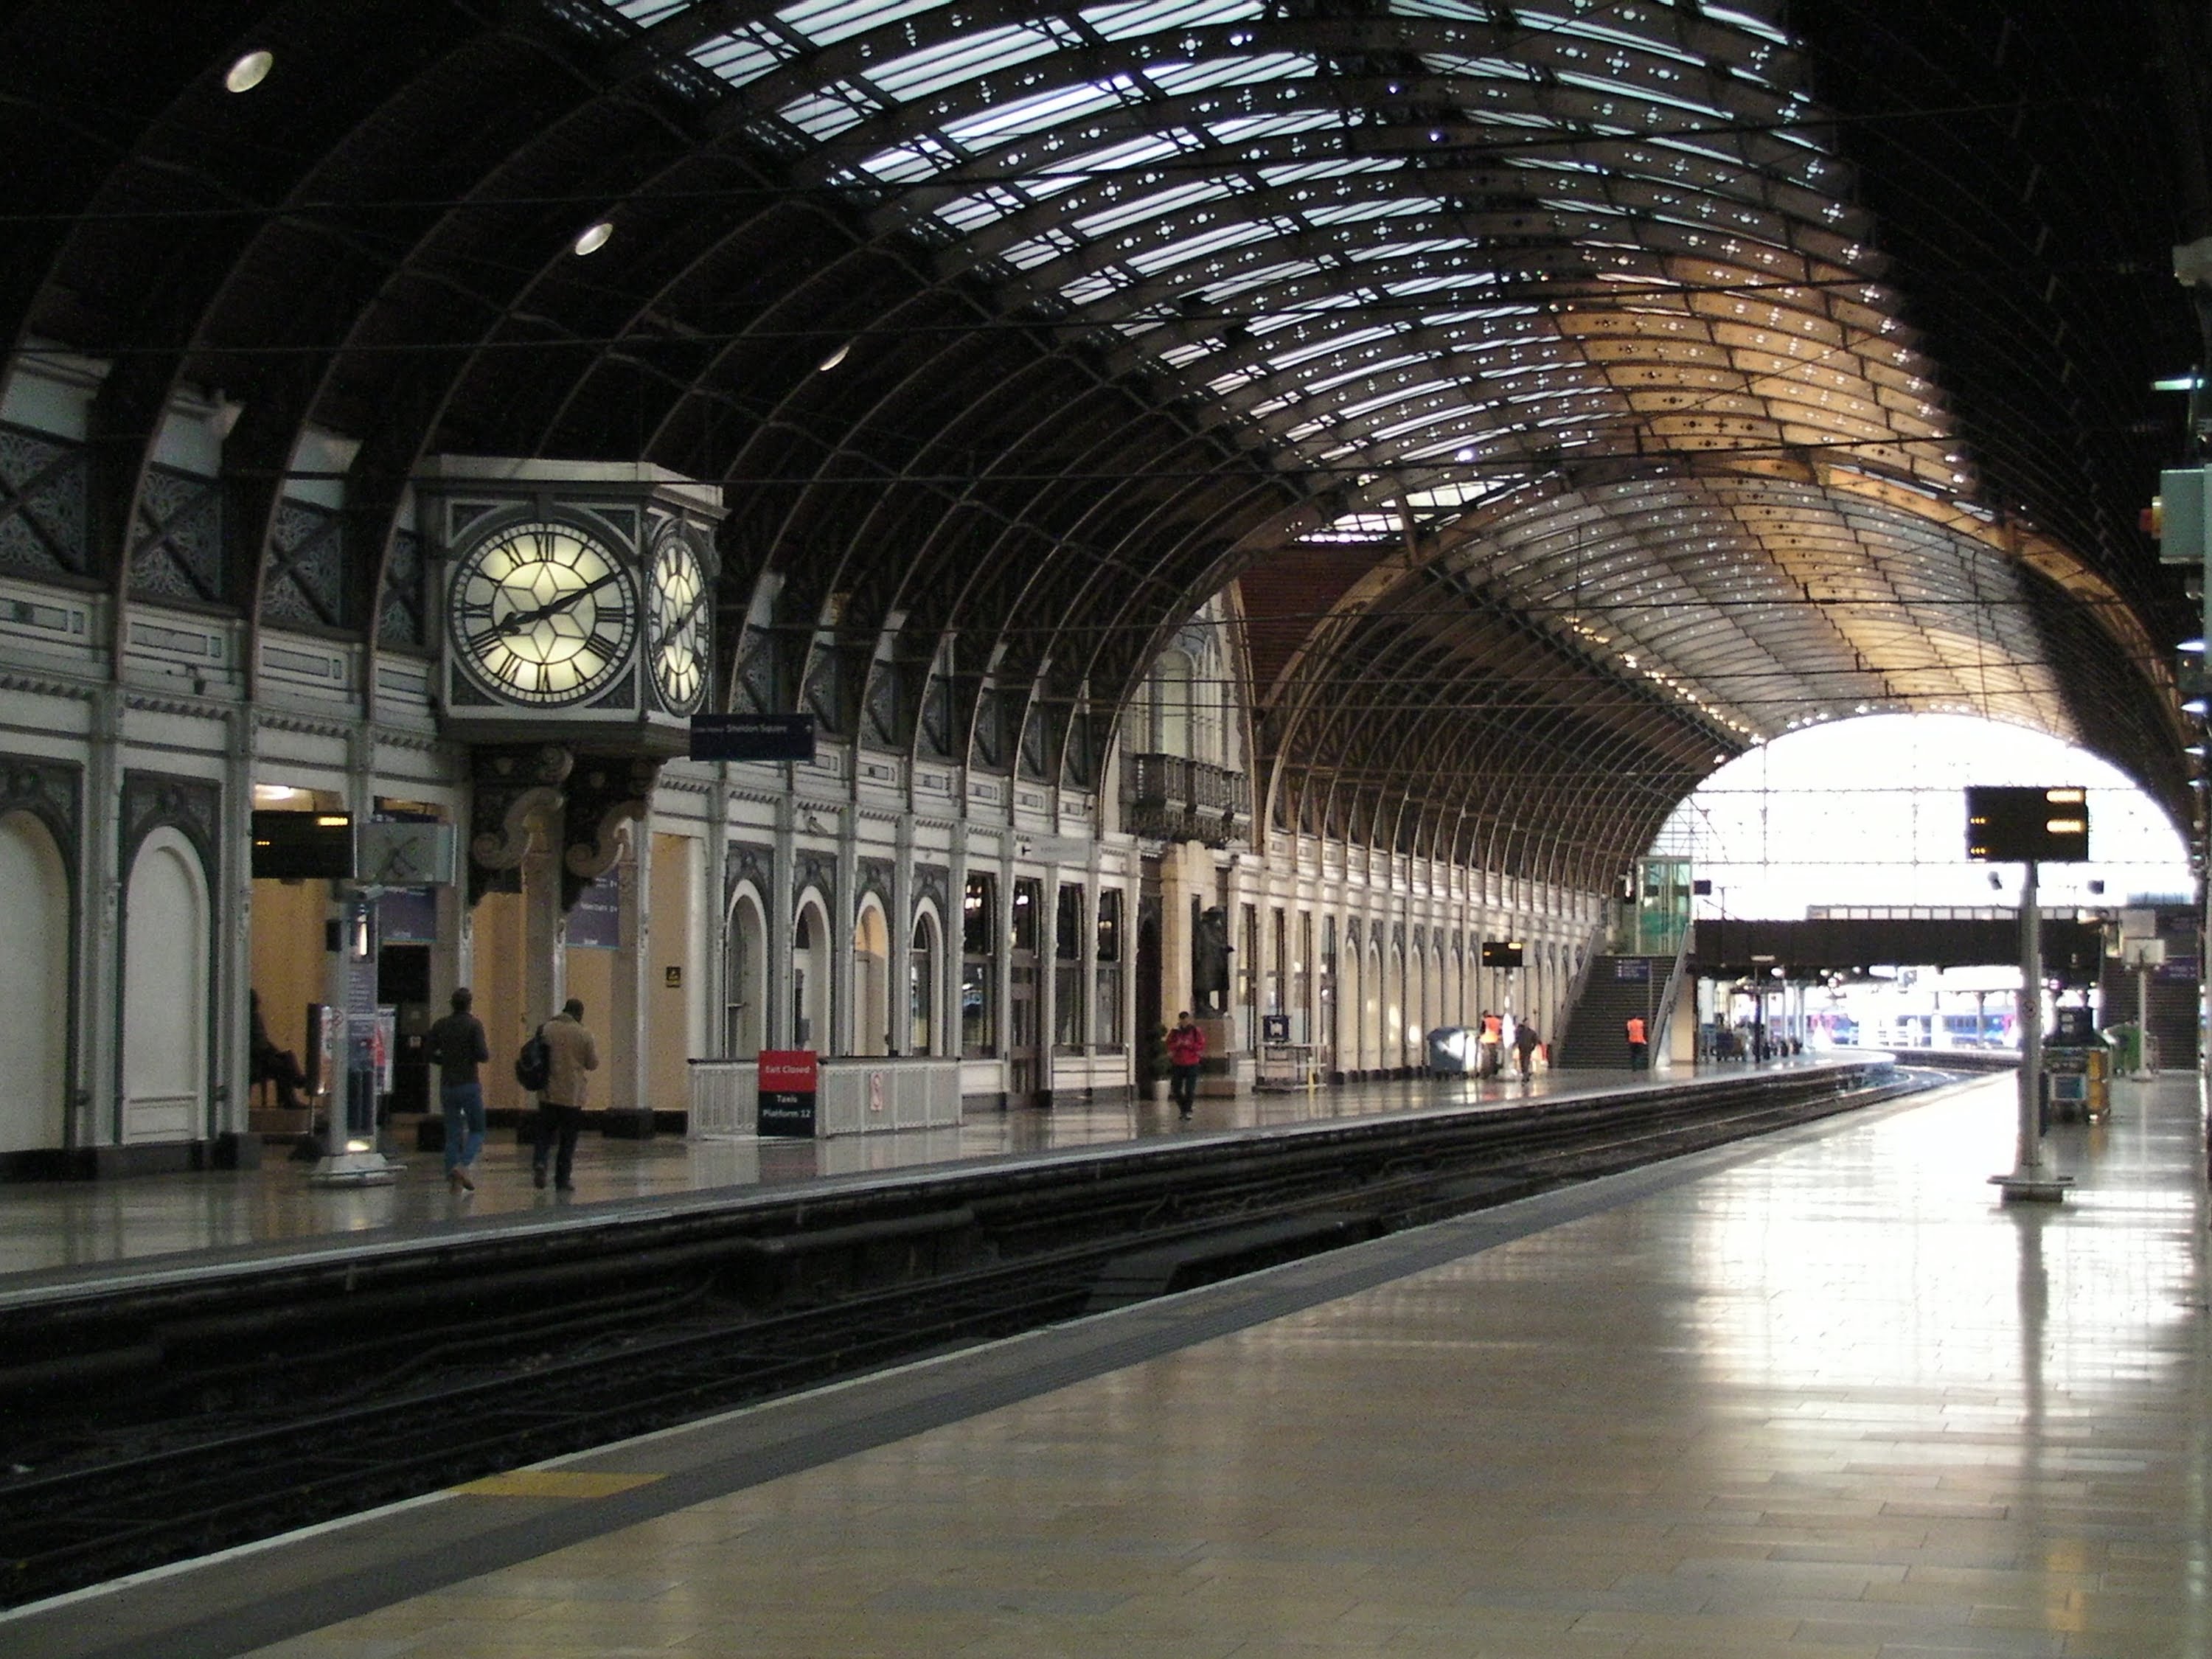 Inside the station photo